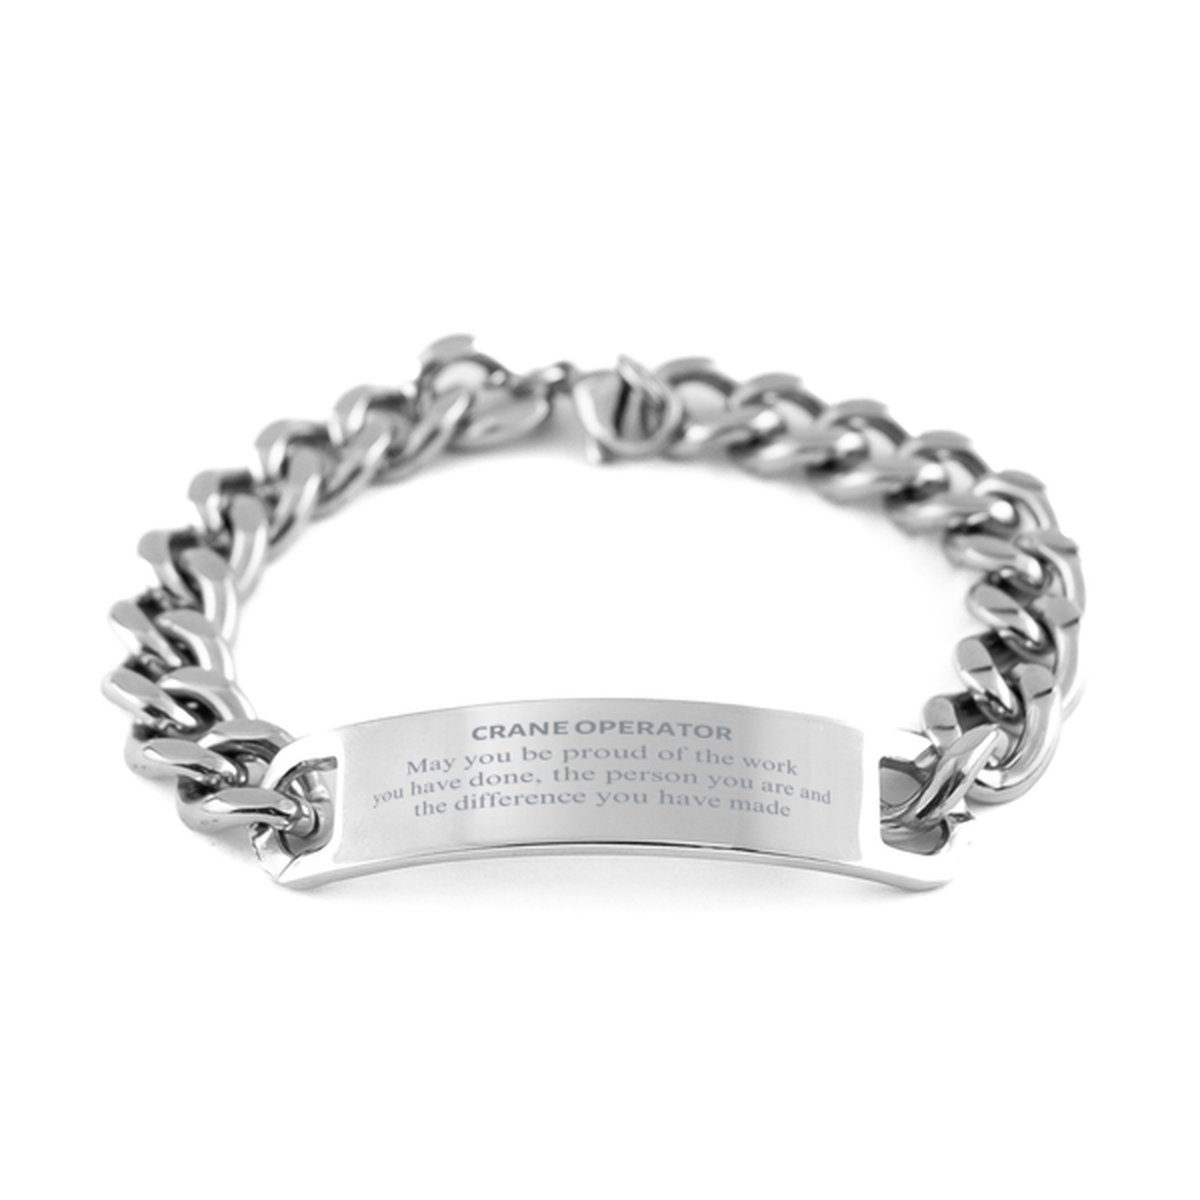 Crane Operator May you be proud of the work you have done, Retirement Crane Operator Cuban Chain Stainless Steel Bracelet for Colleague Appreciation Gifts Amazing for Crane Operator